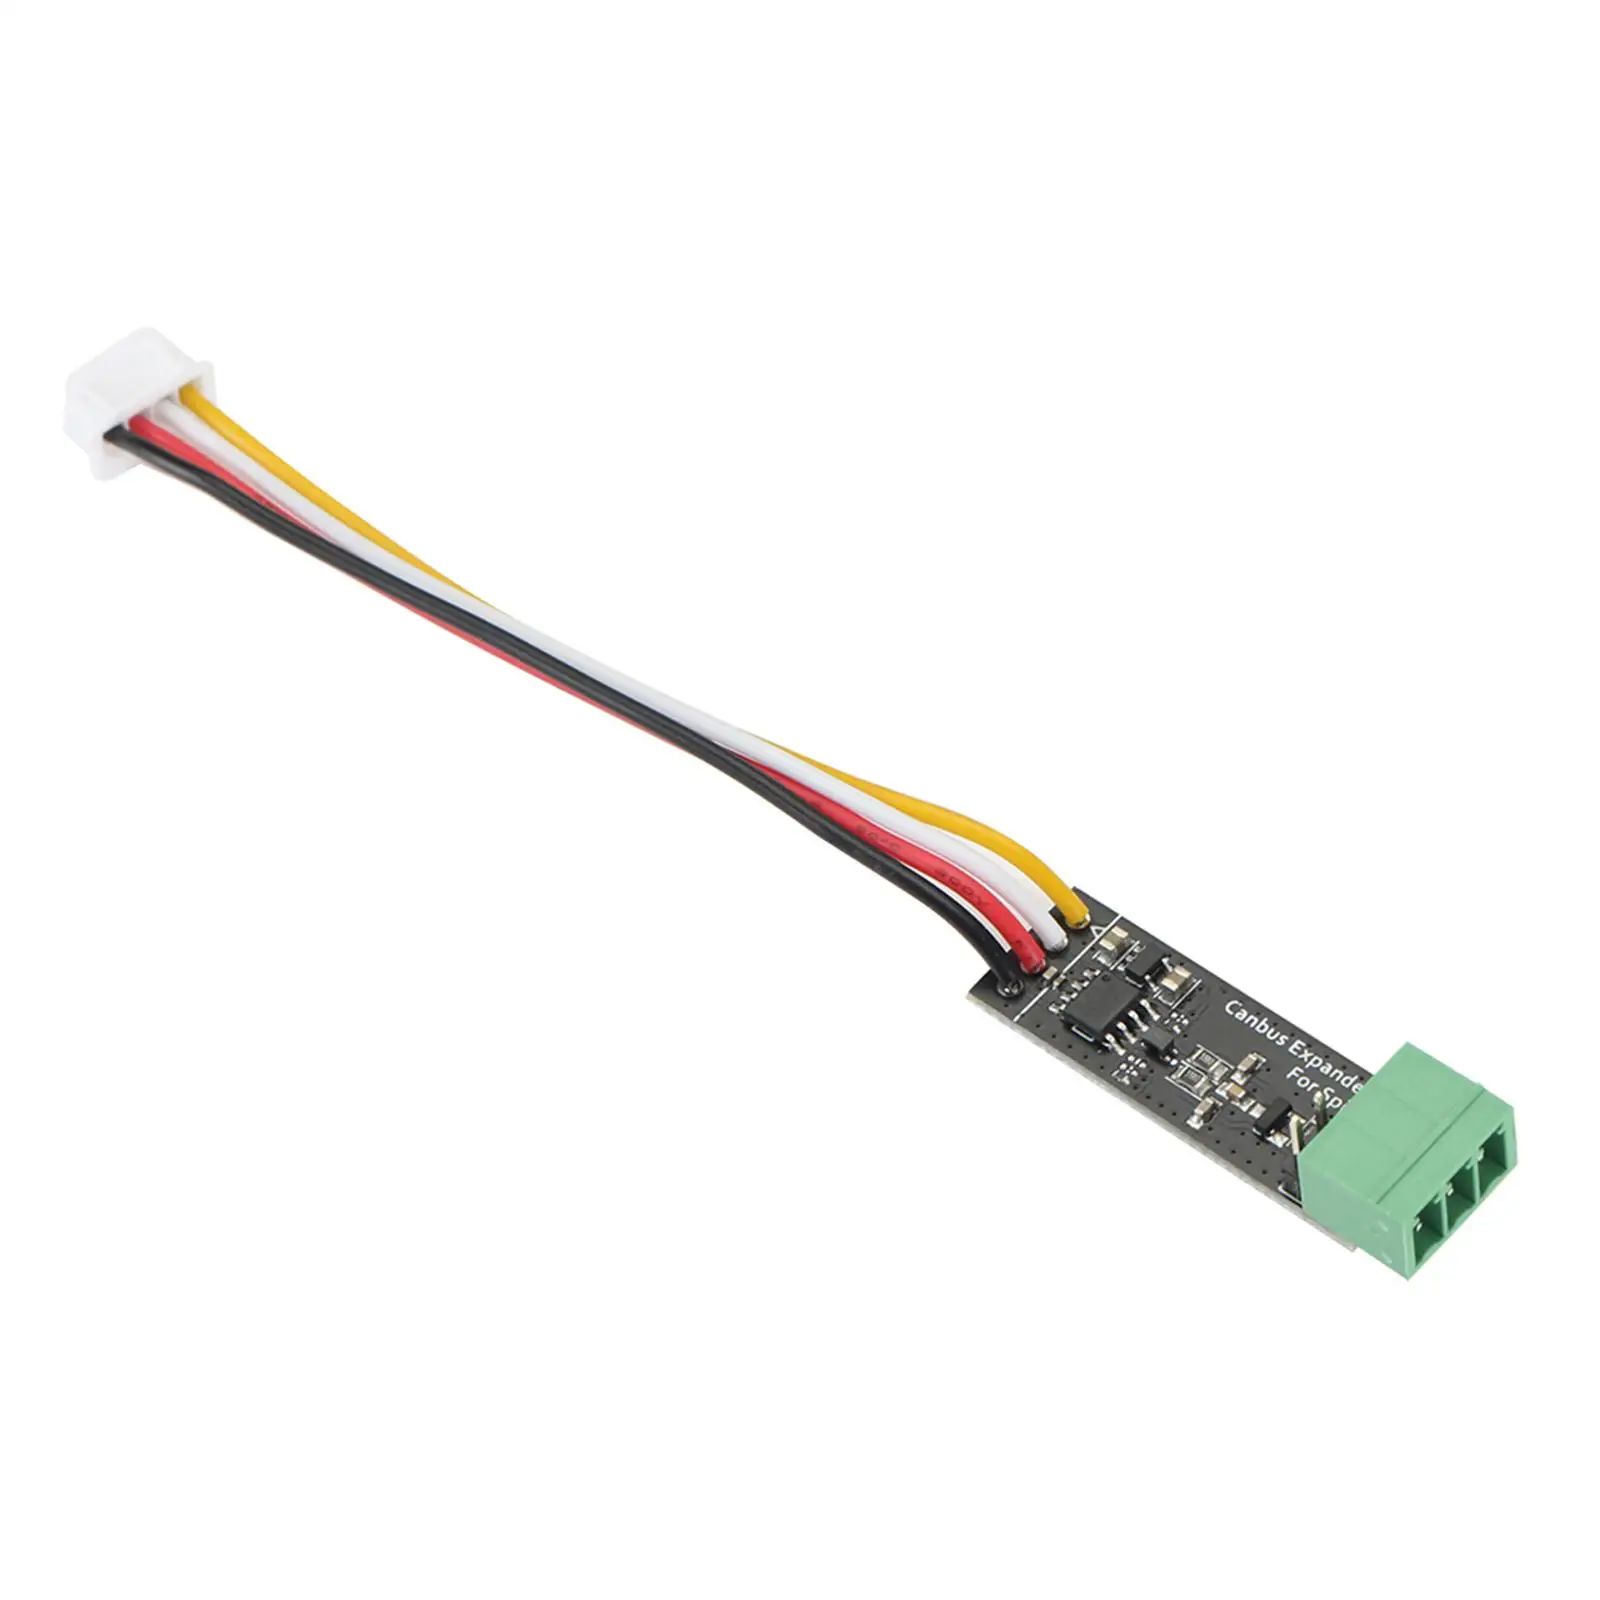 Canbus Expander Module Easy to Install Direct Replaces for Spider Board